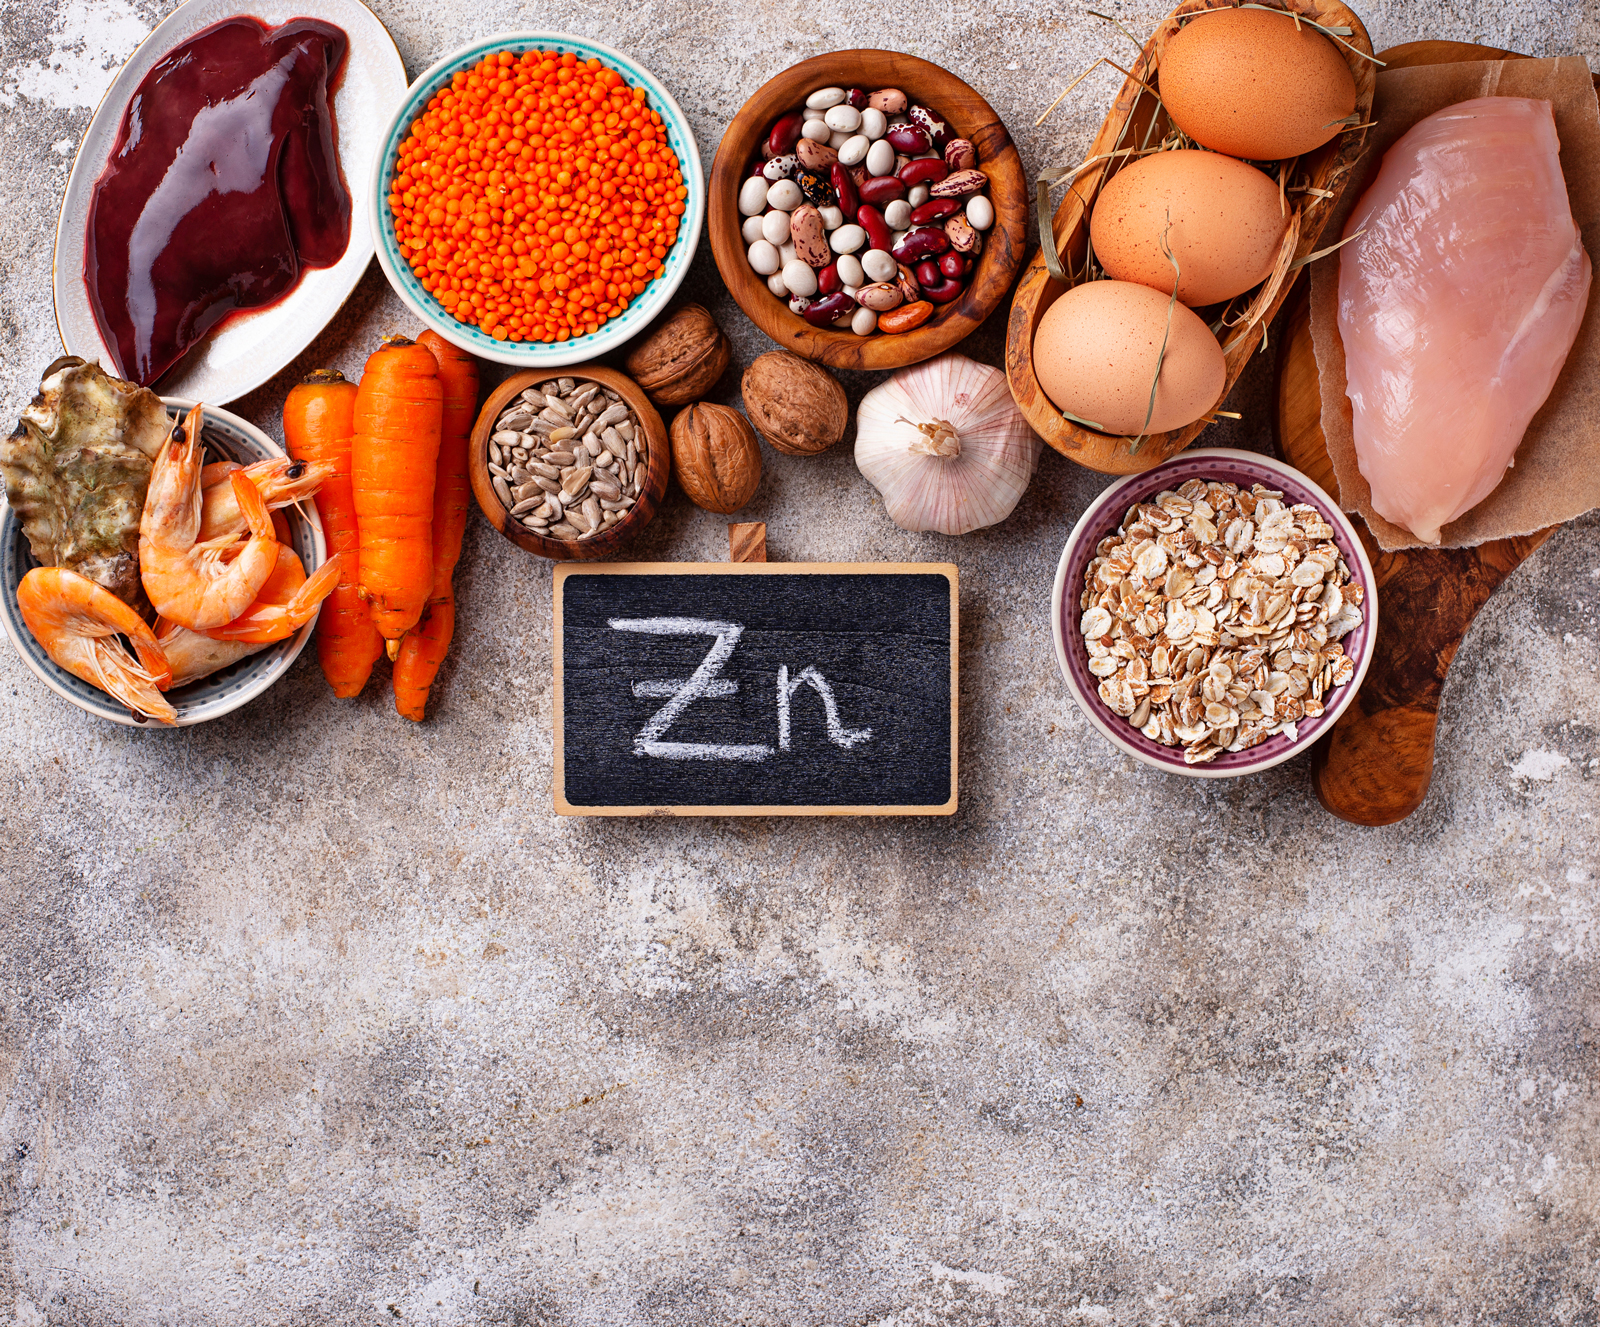 Have you got your Sight Set on Zinc for your Immune System?